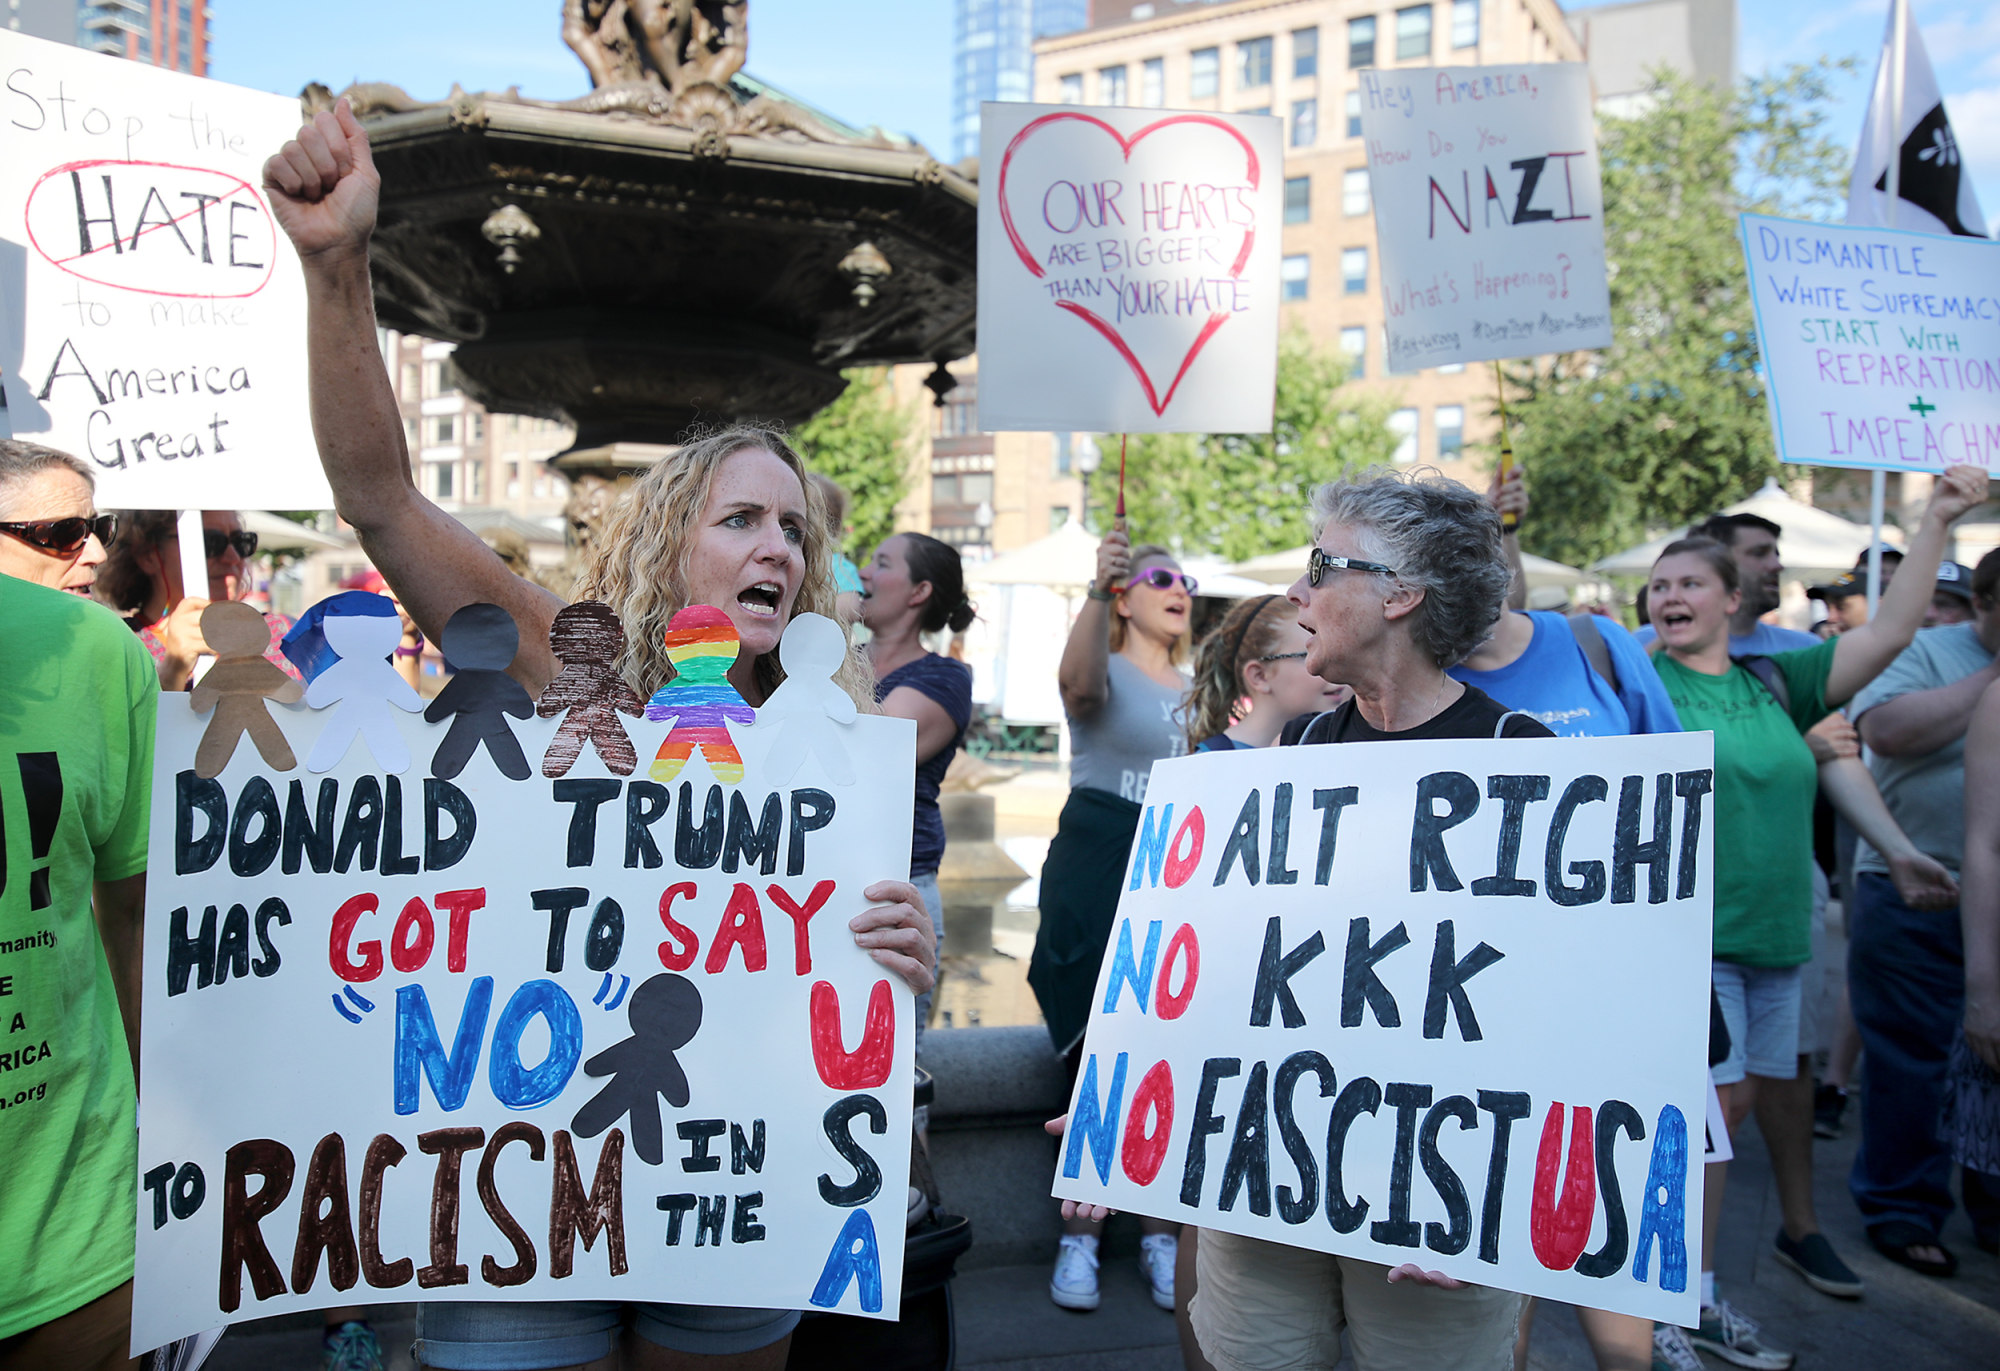 Is Trump a Fascist? Learning About How Fascism Works Can Help Prevent Its Spread in America 180902-think-boston-vigil-supporing-antifa-protesters-se-727p_0c97c748872657cb2a188d37e9b44b95.fit-2000w